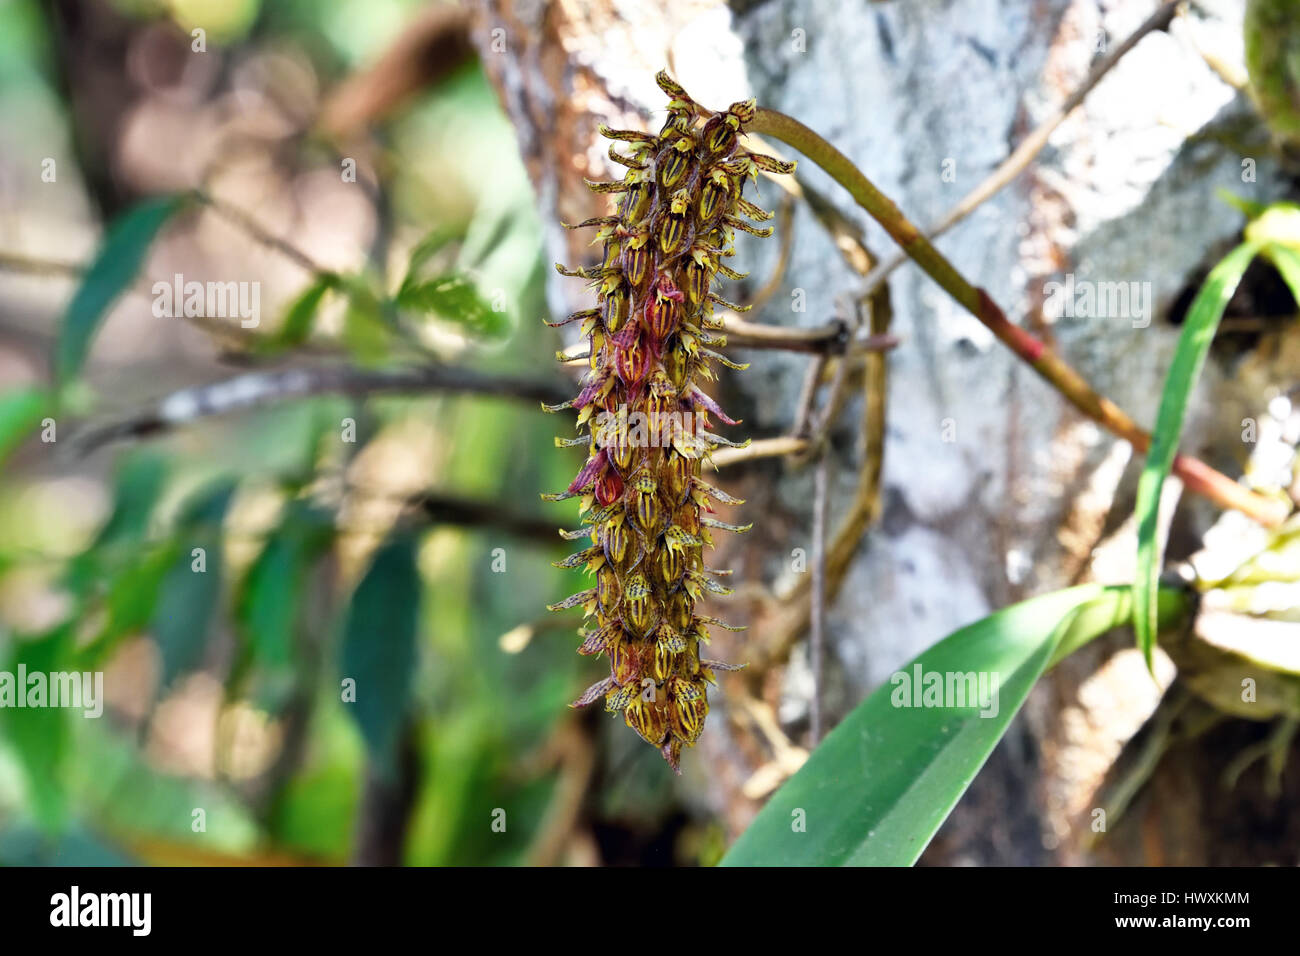 A miniature wild orchid (Bulbophyllum morphologorum) with many tiny flowers on a single stem growing on a tree in the forest in North East Thailand Stock Photo